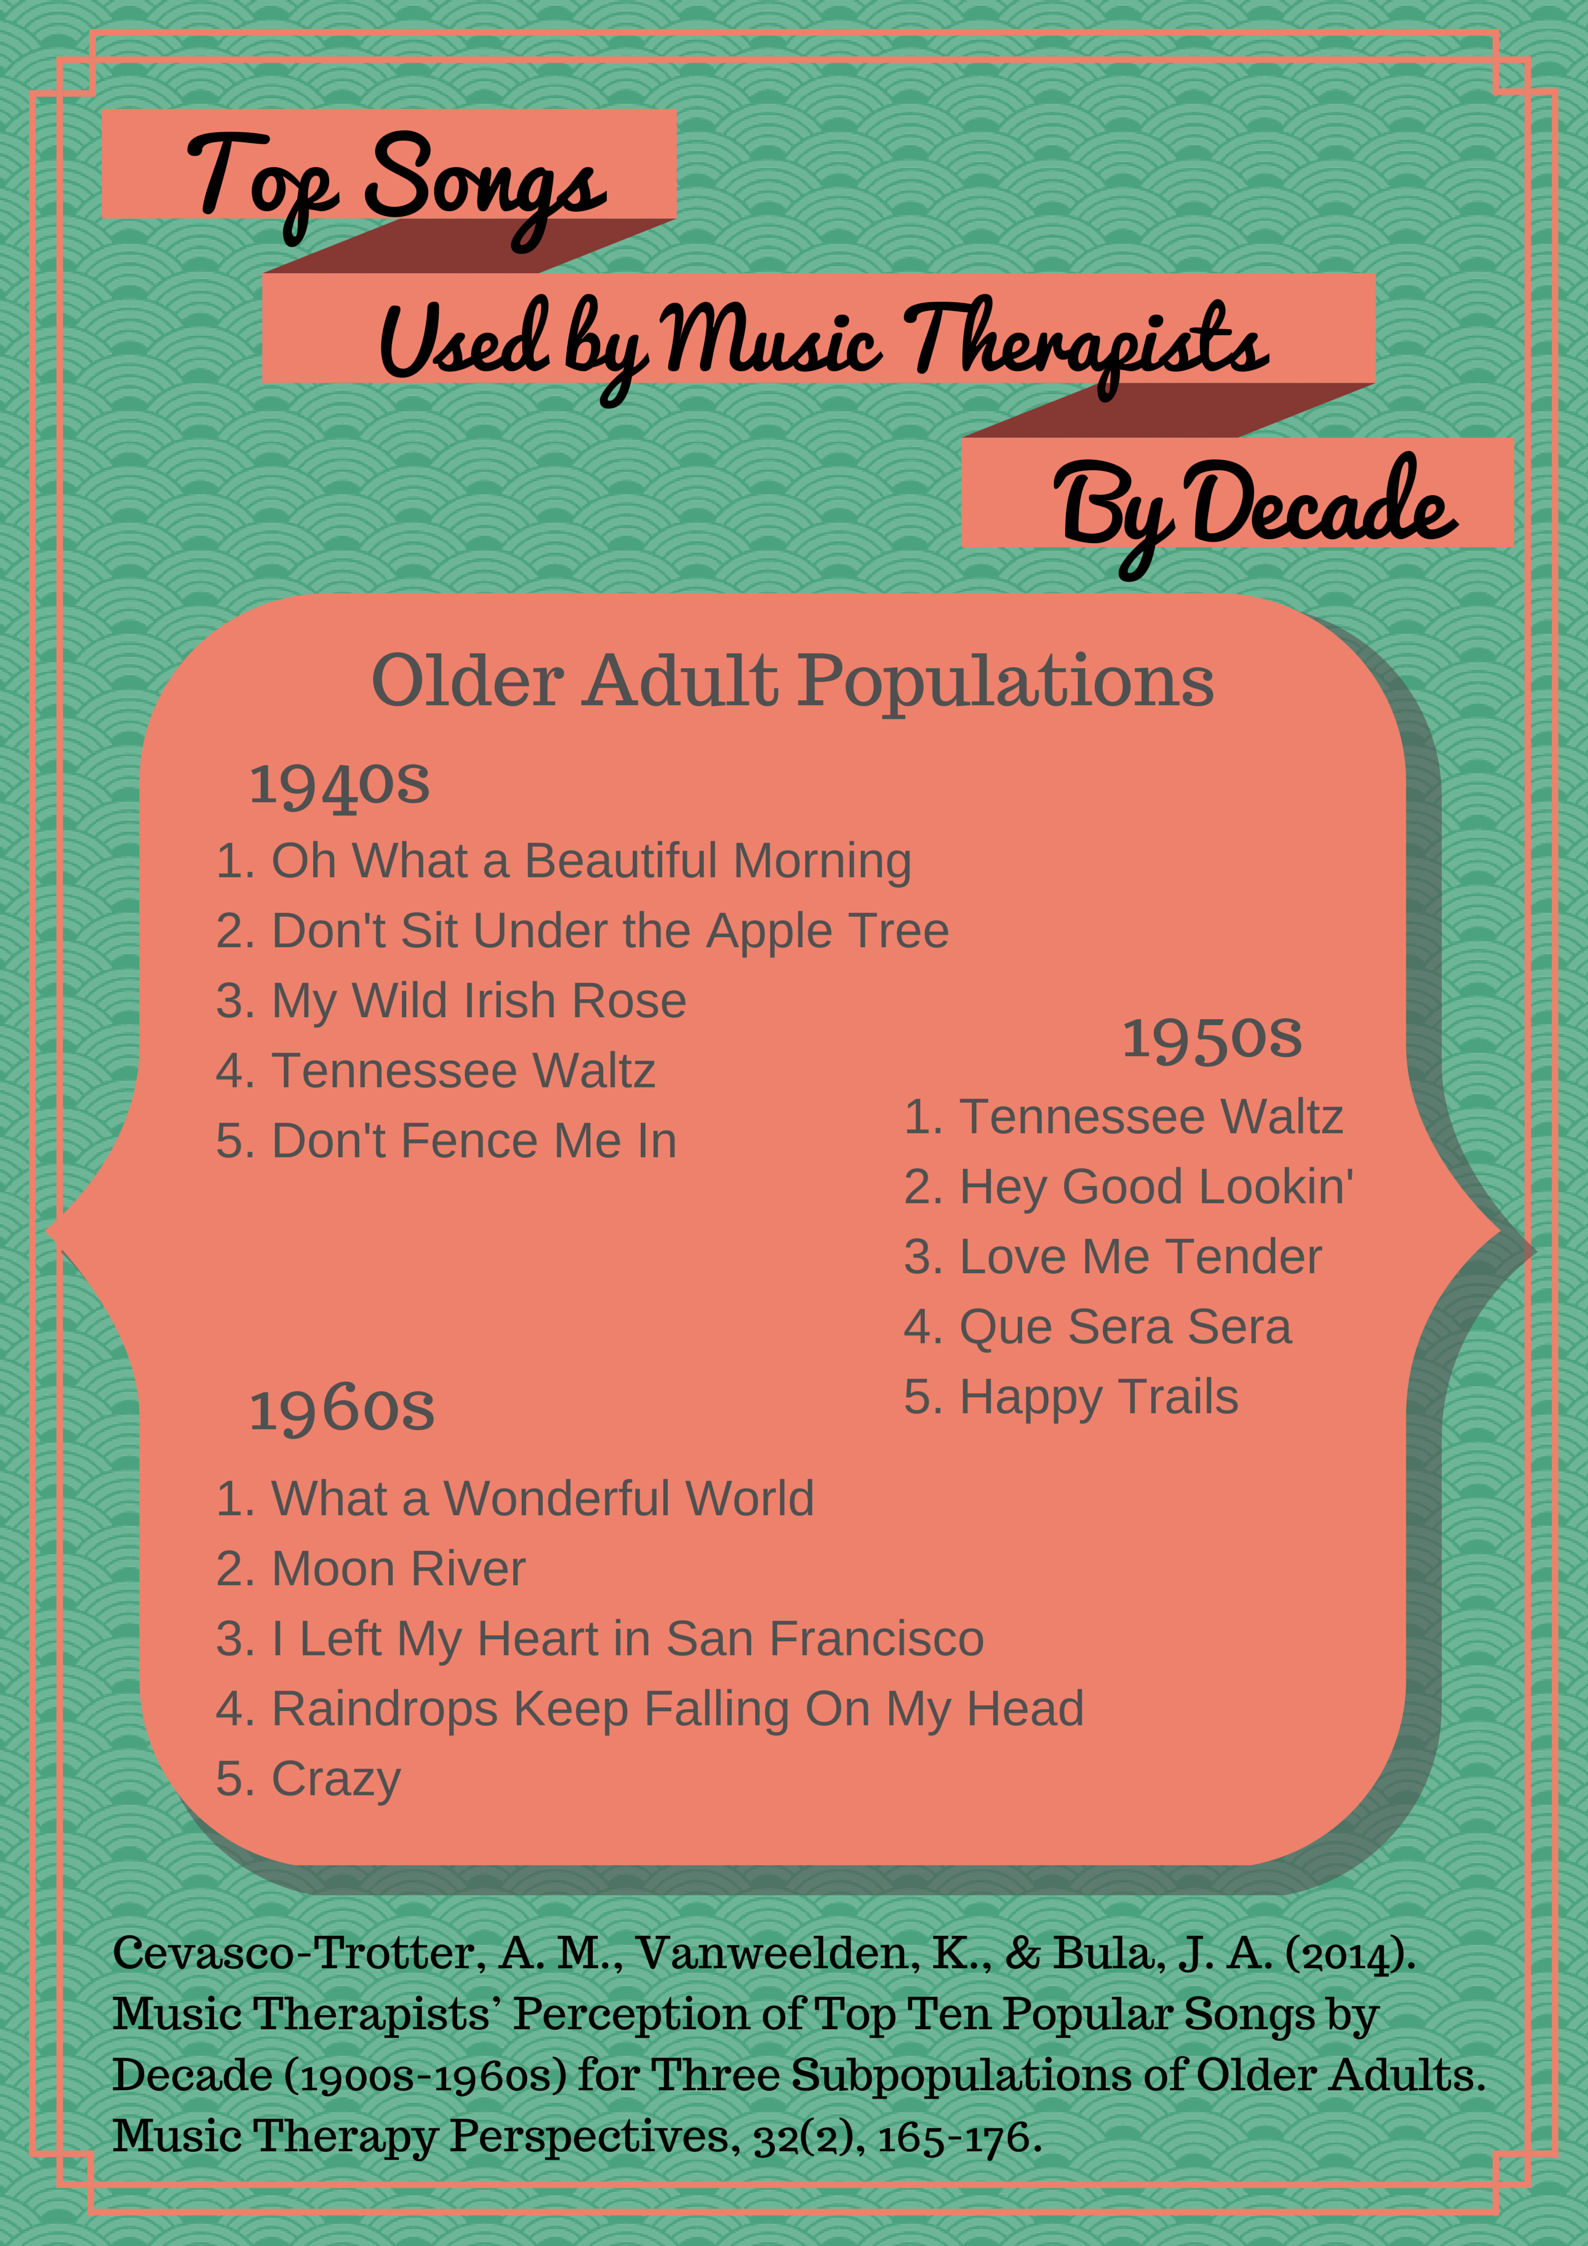 Top Songs Used By Music Therapists for Older Adults Populations